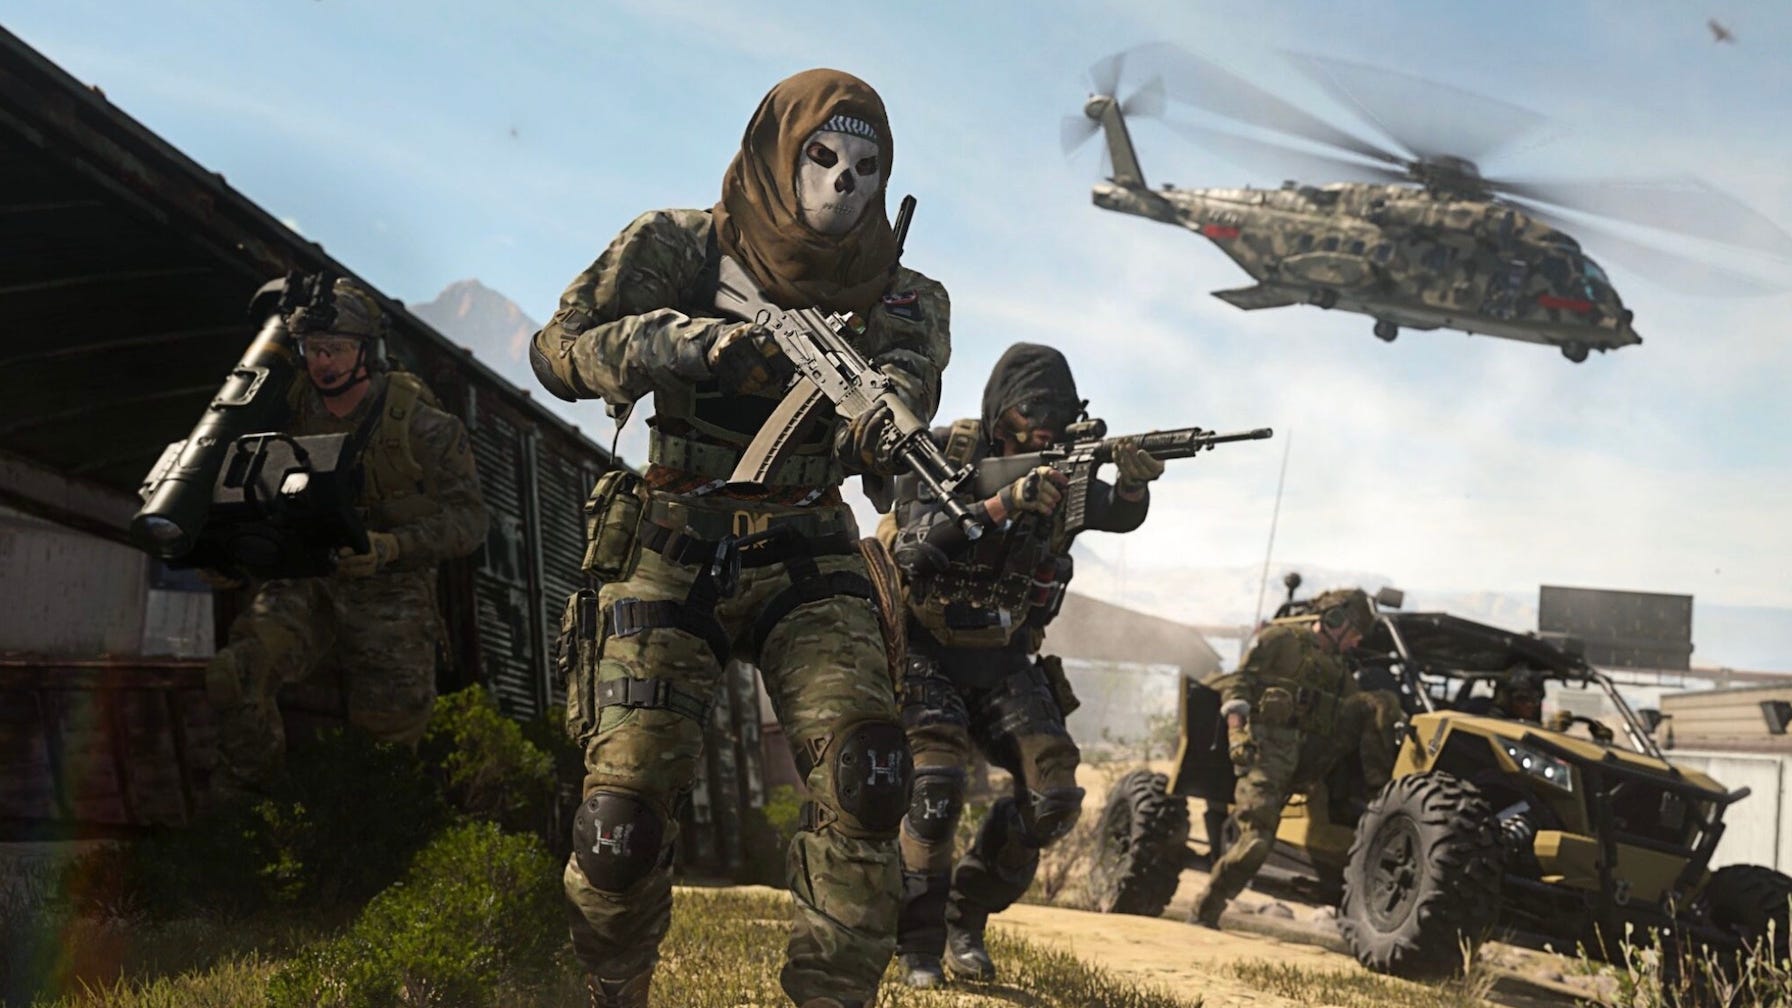 Is Call of Duty Modern Warfare (2019) worth playing in July 2022?